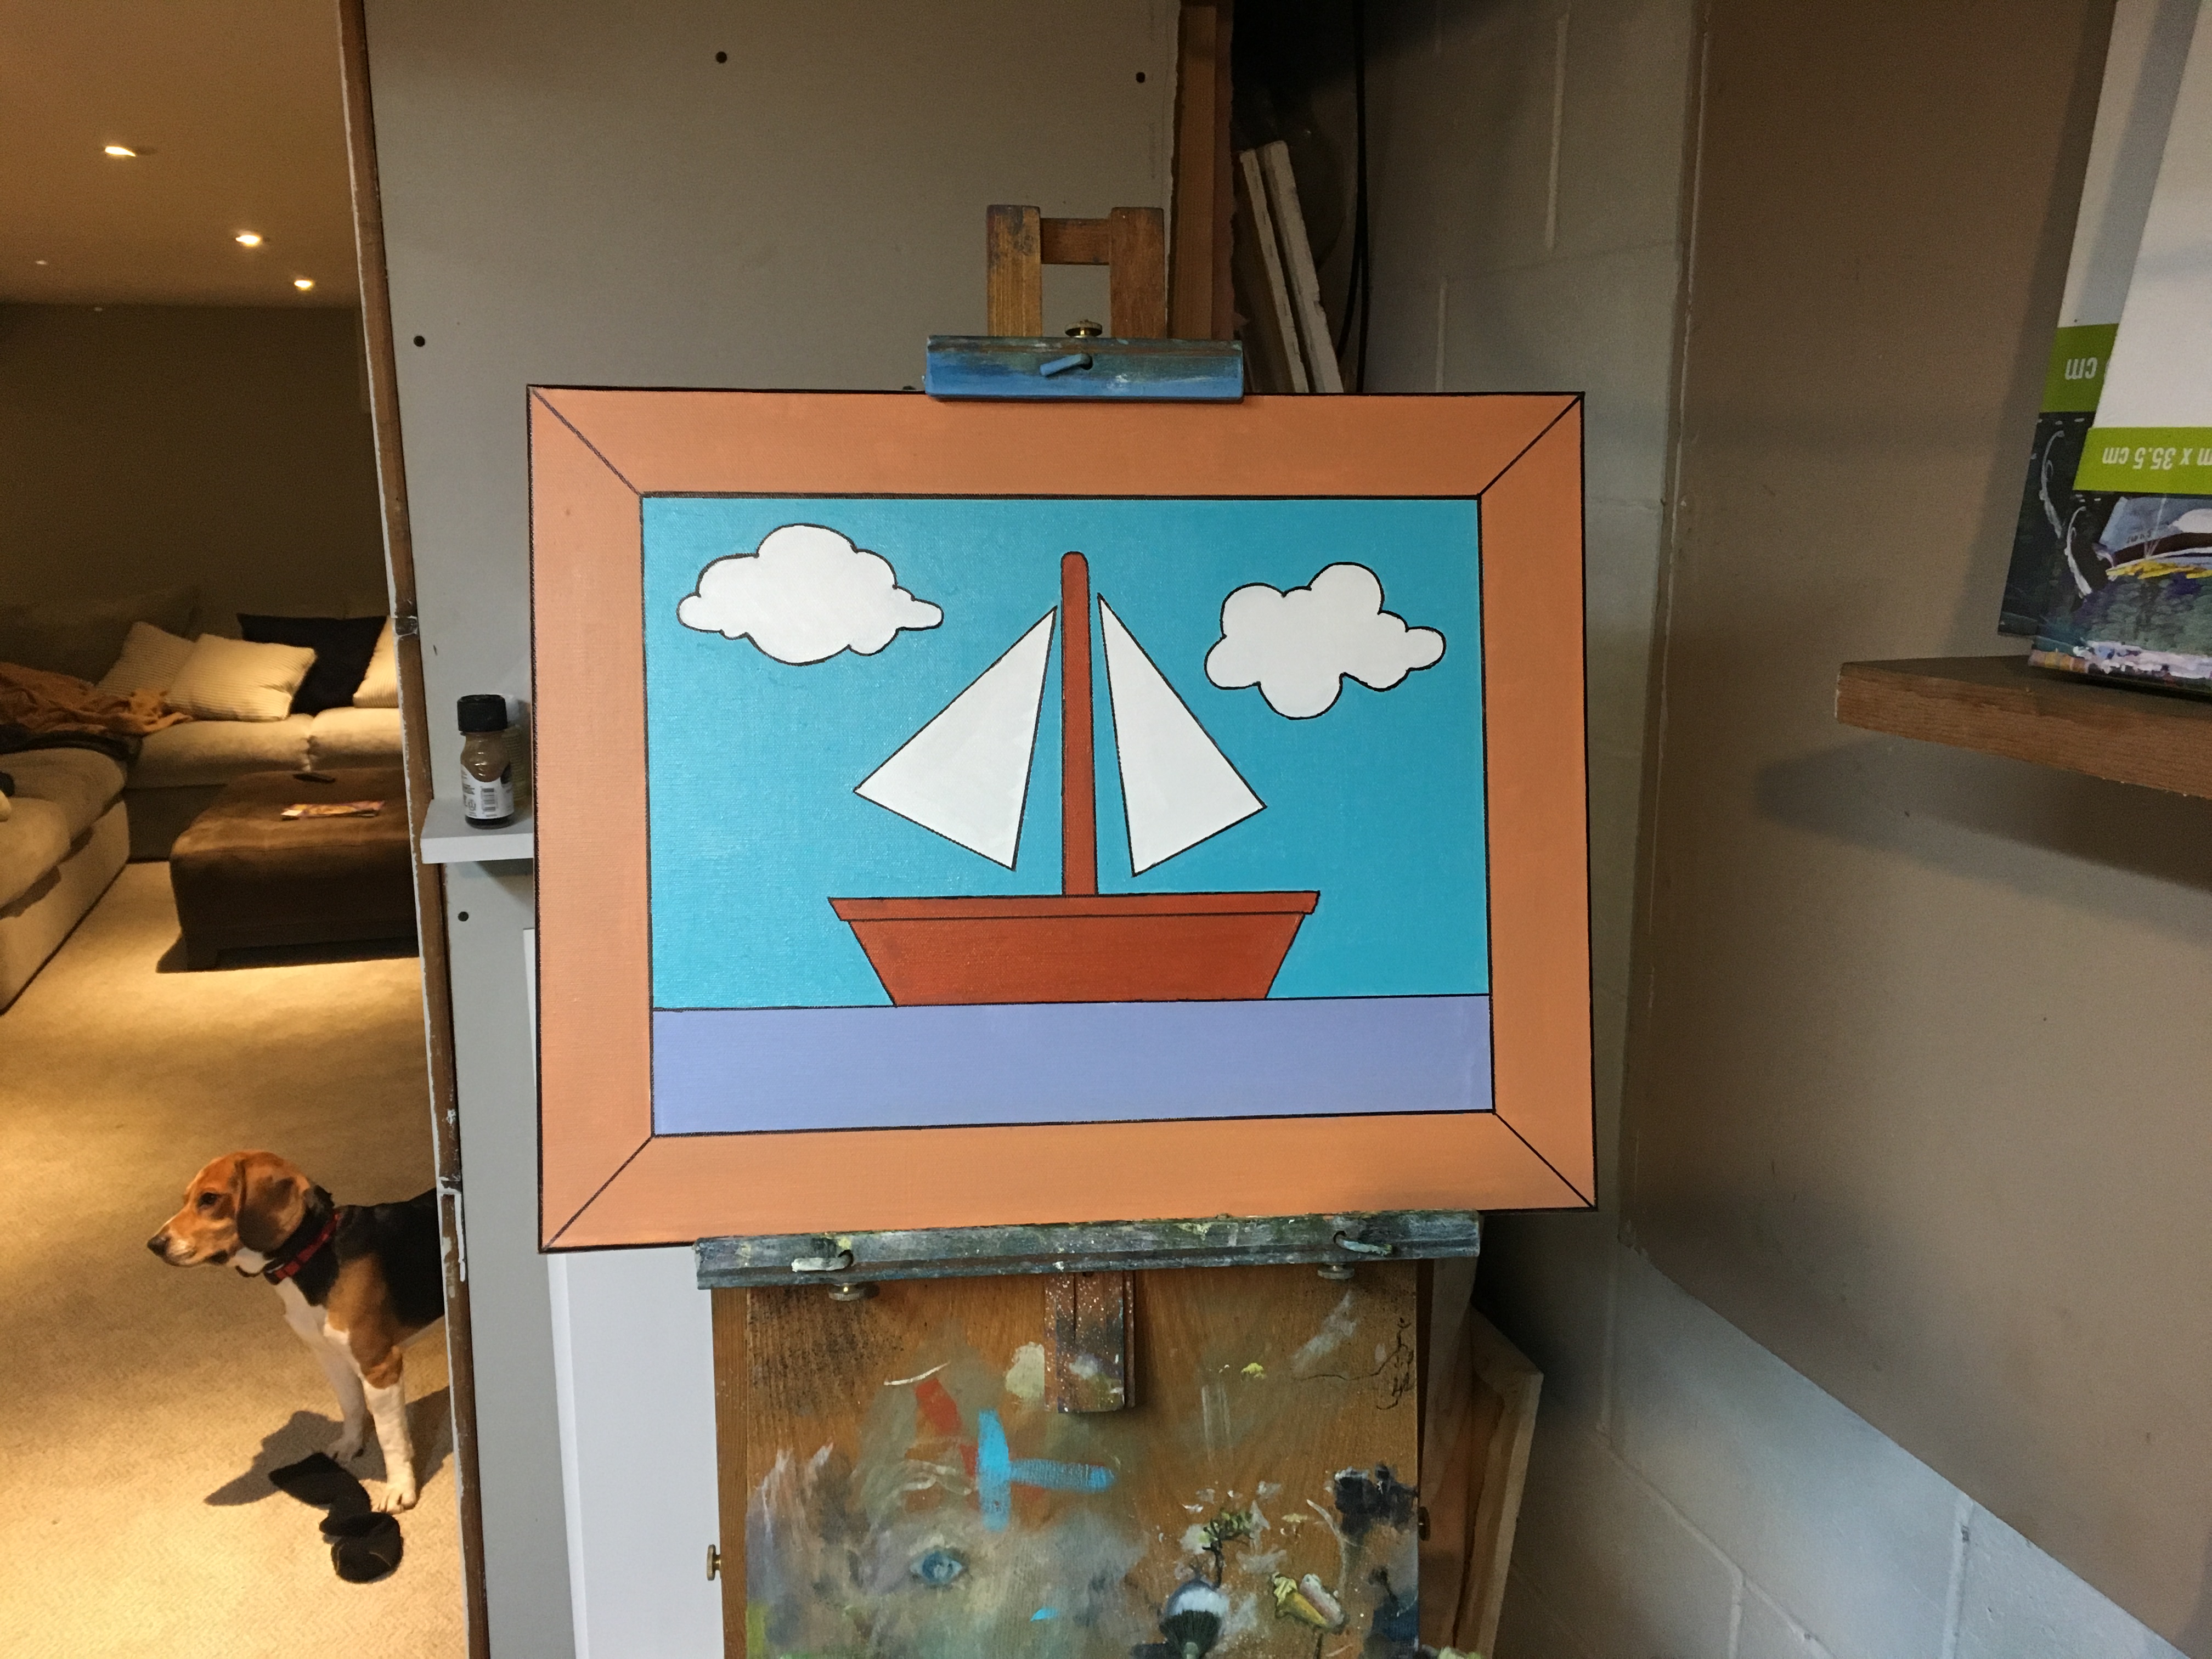 4032x3024 Simpsons Sailboat Painting - The Simpsons Sailboat Painting